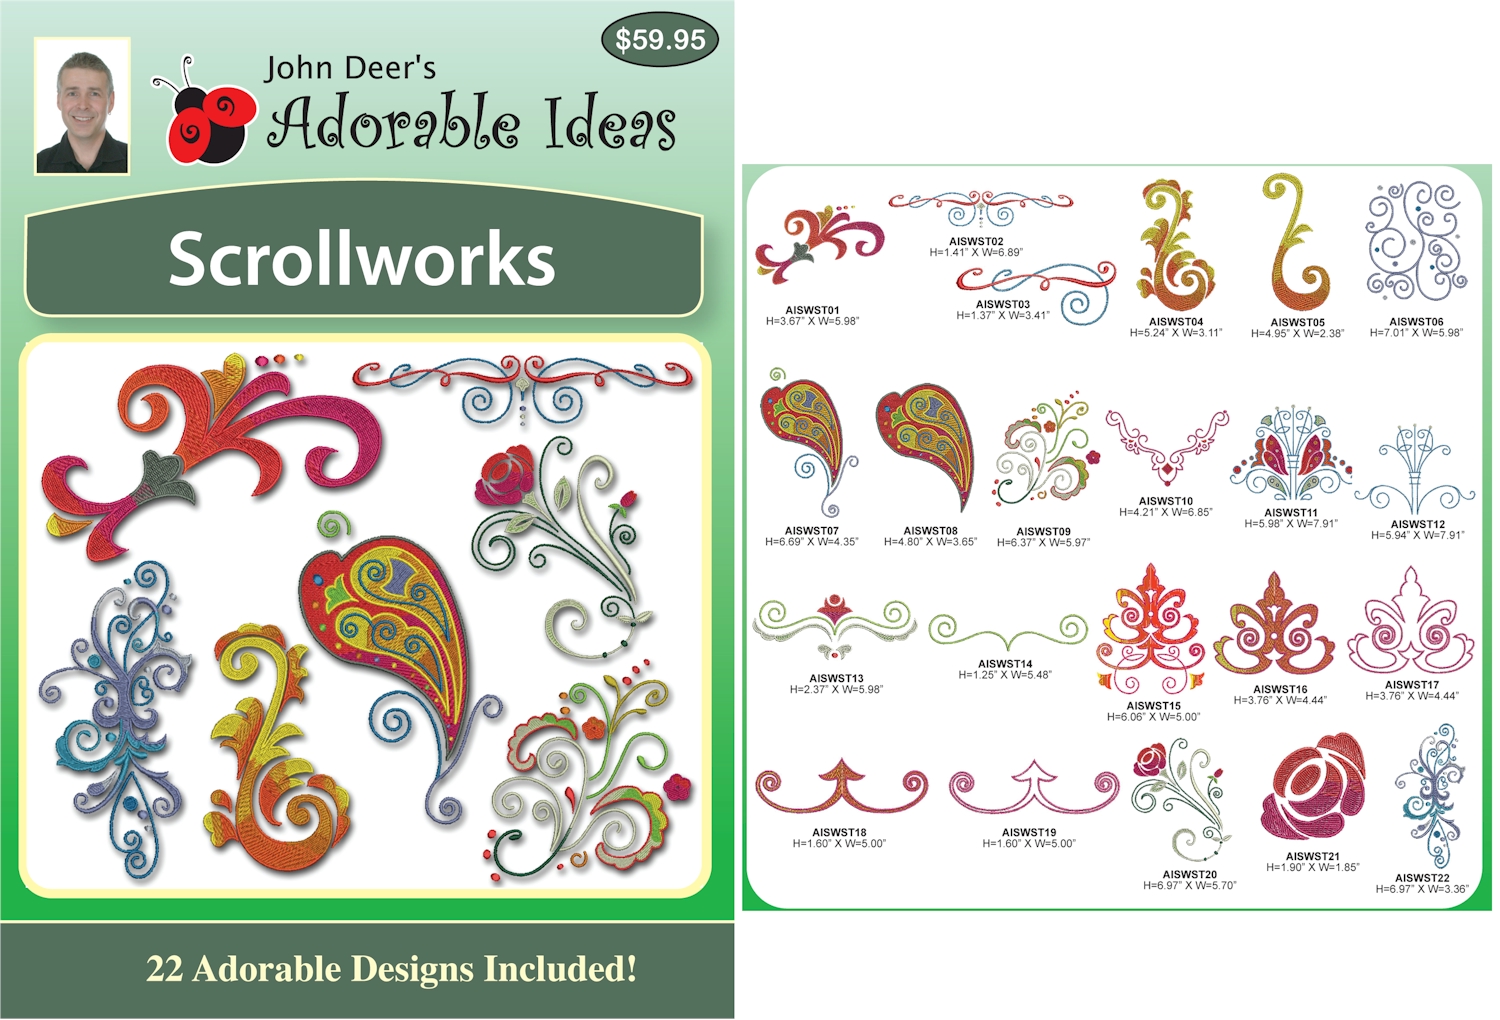 Scrollworks Embroidery Designs by John Deer's Adorable Ideas - Multi-Format CD-ROM